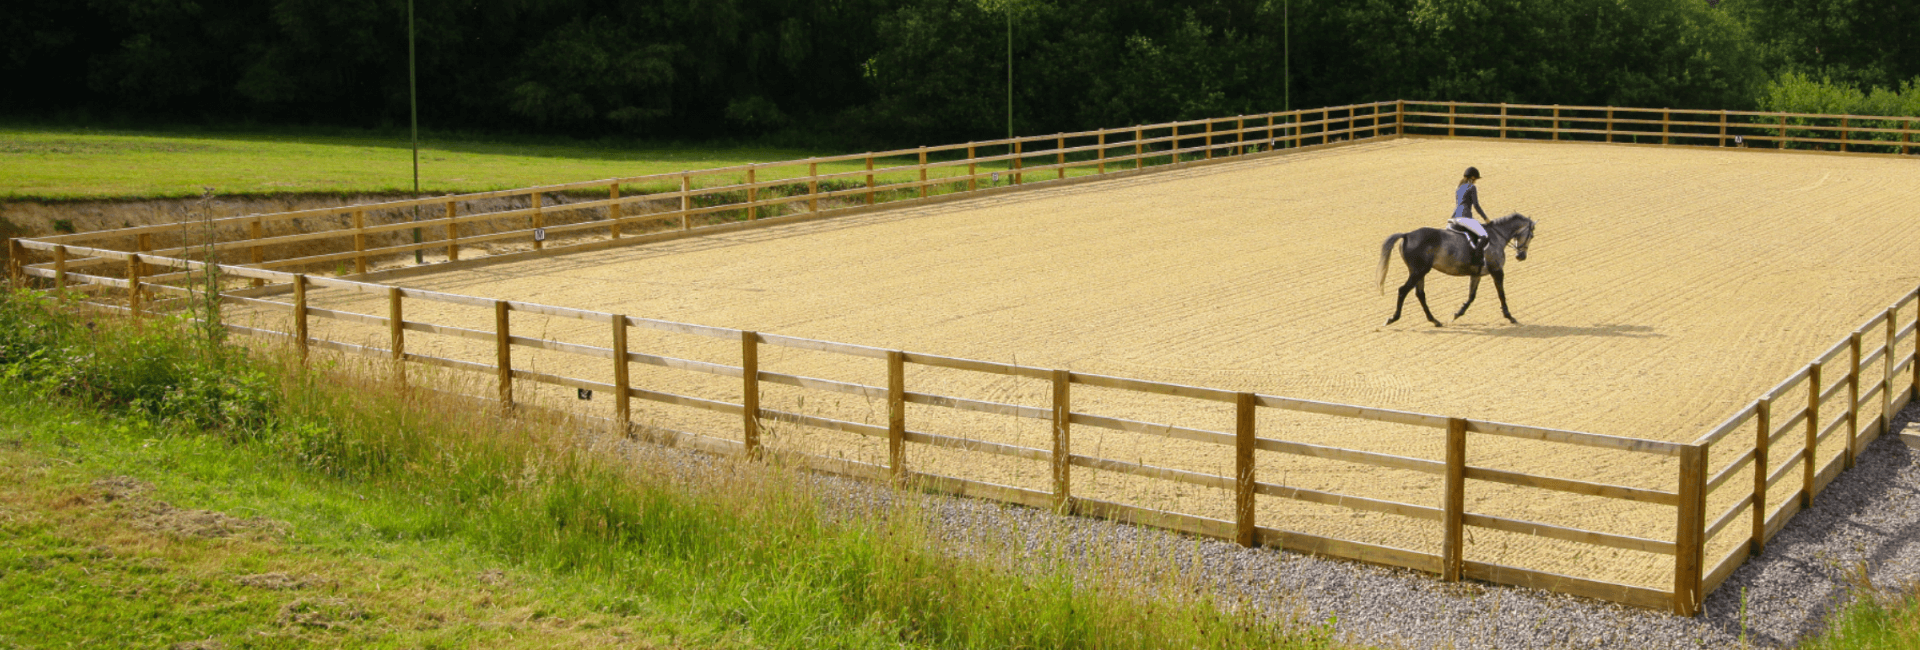 https://www.dayaggregates.co.uk/wp-content/uploads/sites/3/2020/02/Day_Aggregates_Equestrian_Banner_1920x650.png